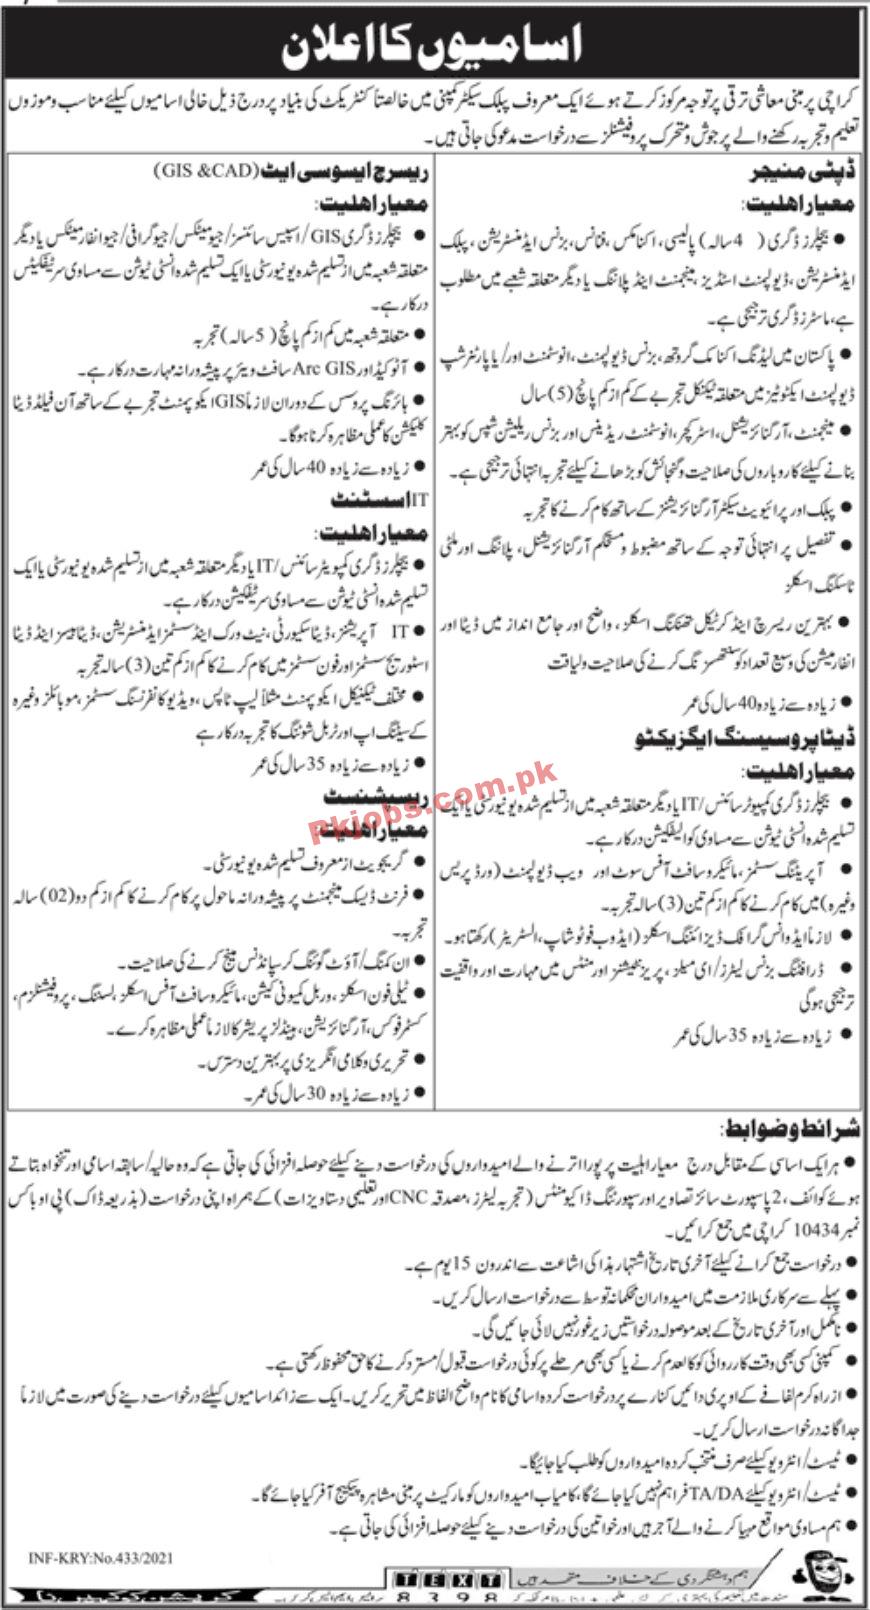 Jobs in Public Sector Company